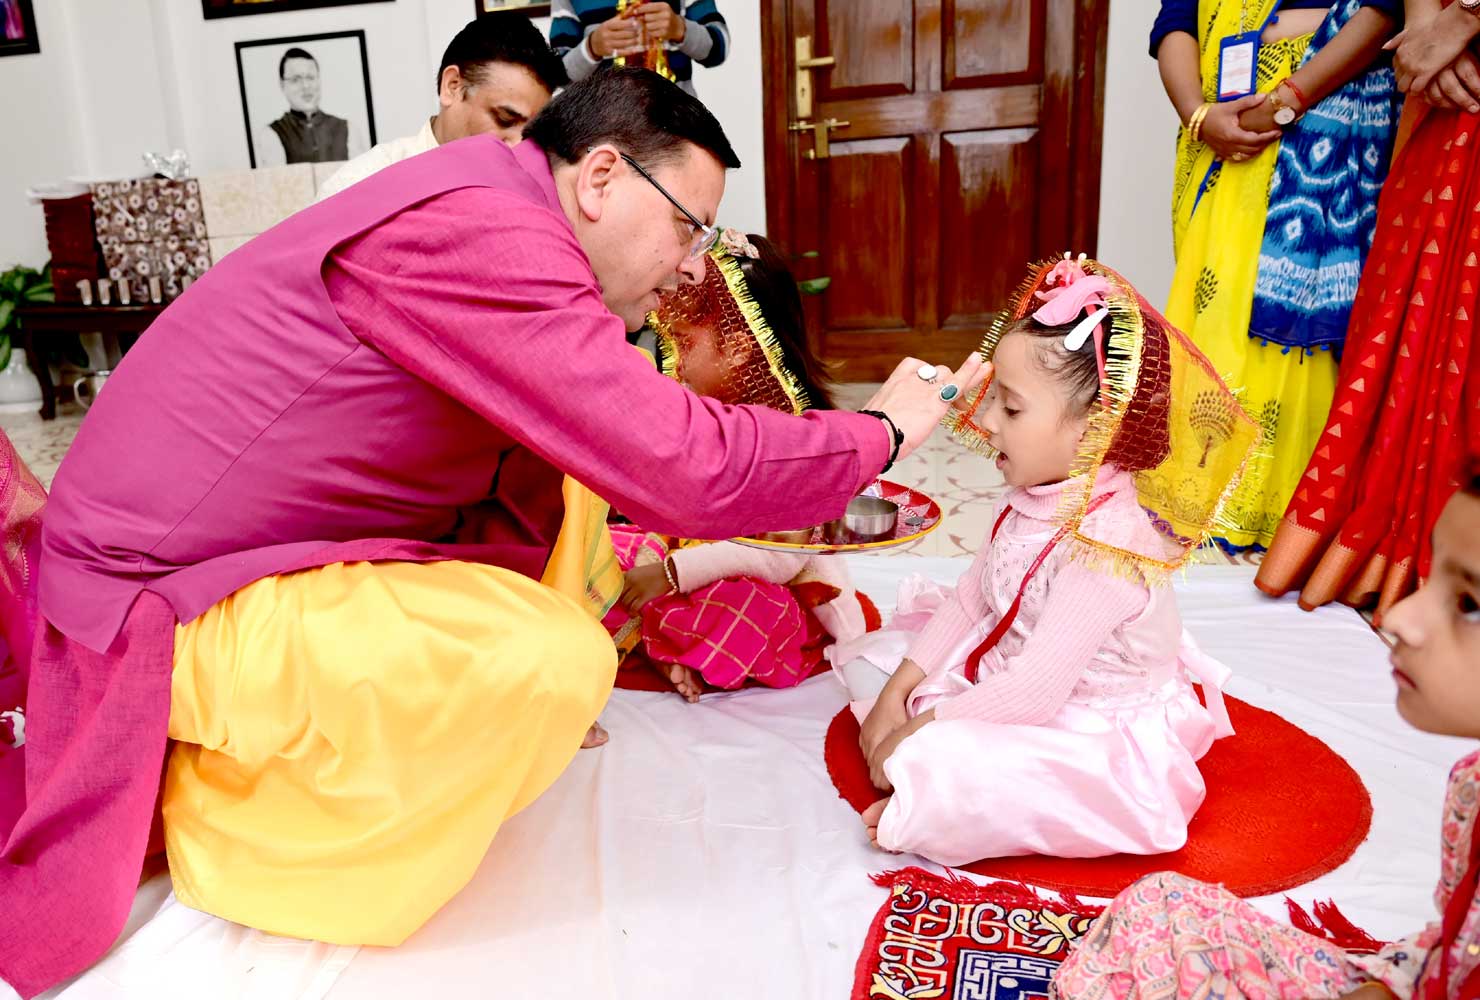 Chief Minister Dhami performed Kanya Puja